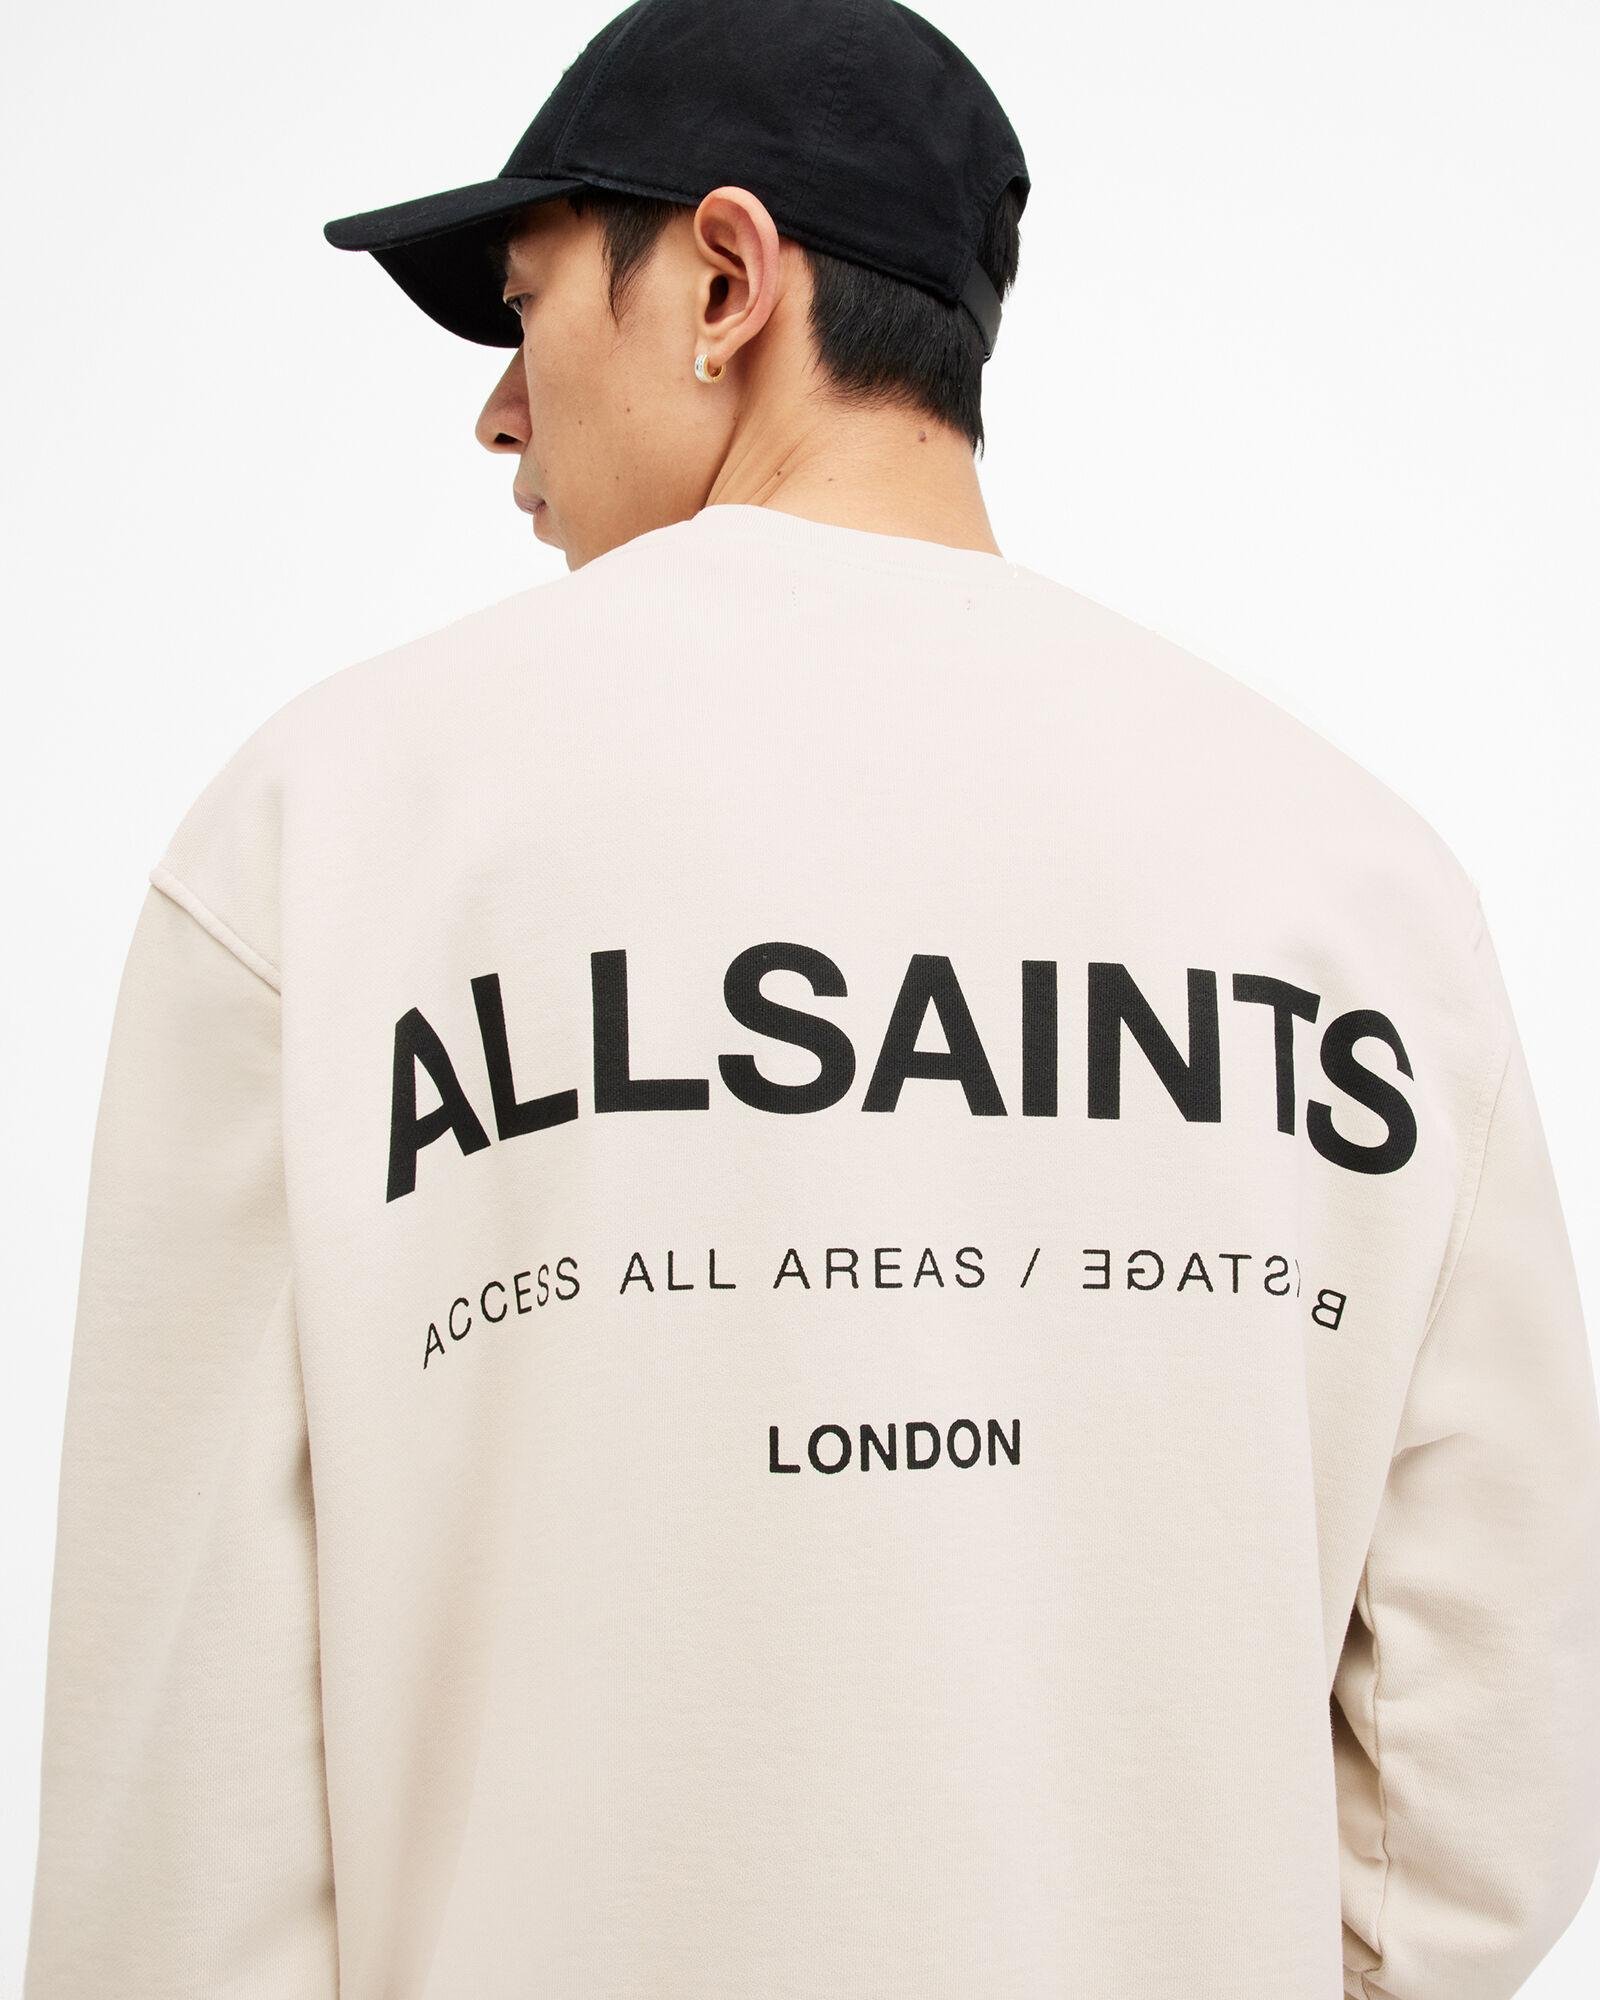 Access Relaxed Fit Crew Neck Sweatshirt by ALLSAINTS